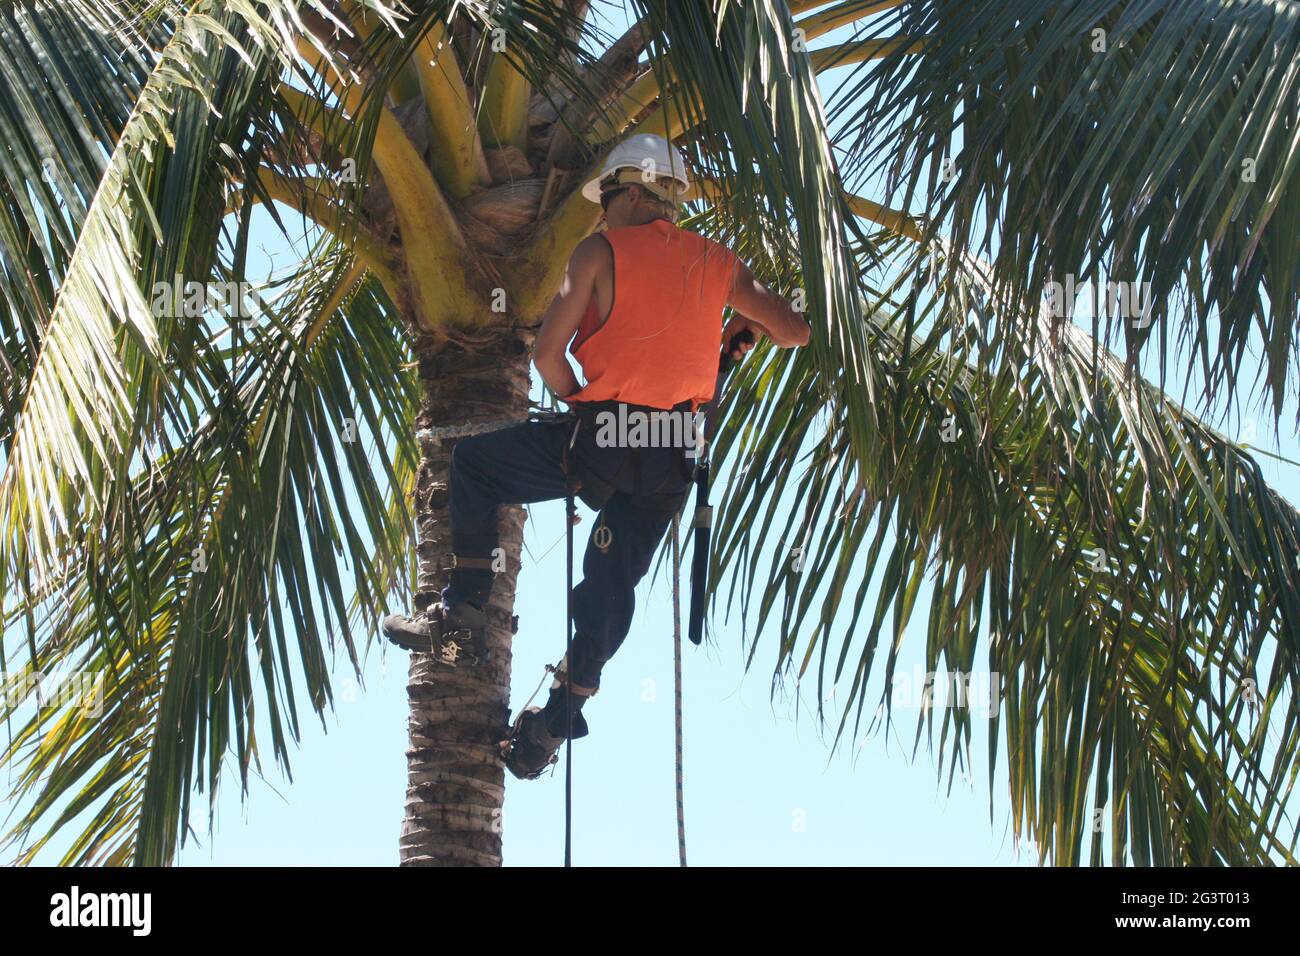 coconut palm (Cocos nucifera), worker climbing a coconut tree with safety equipment, Australia, Queensland Stock Photo